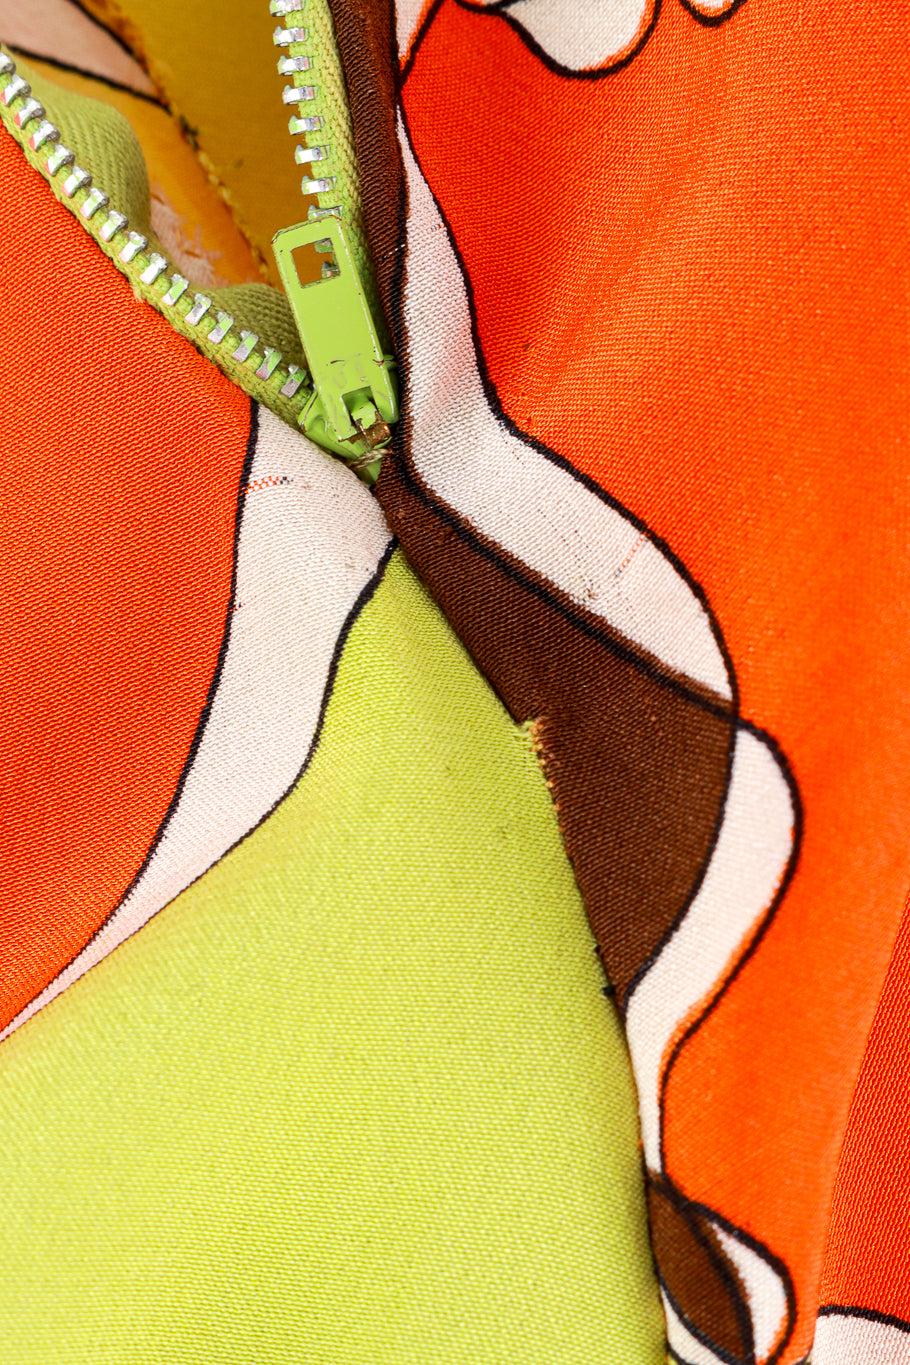 Vintage Emilio Pucci ruffle tunic high waisted trouser set flat lay close up detail of the pulls to the seam at the zipper in the pants  @RECESS LA